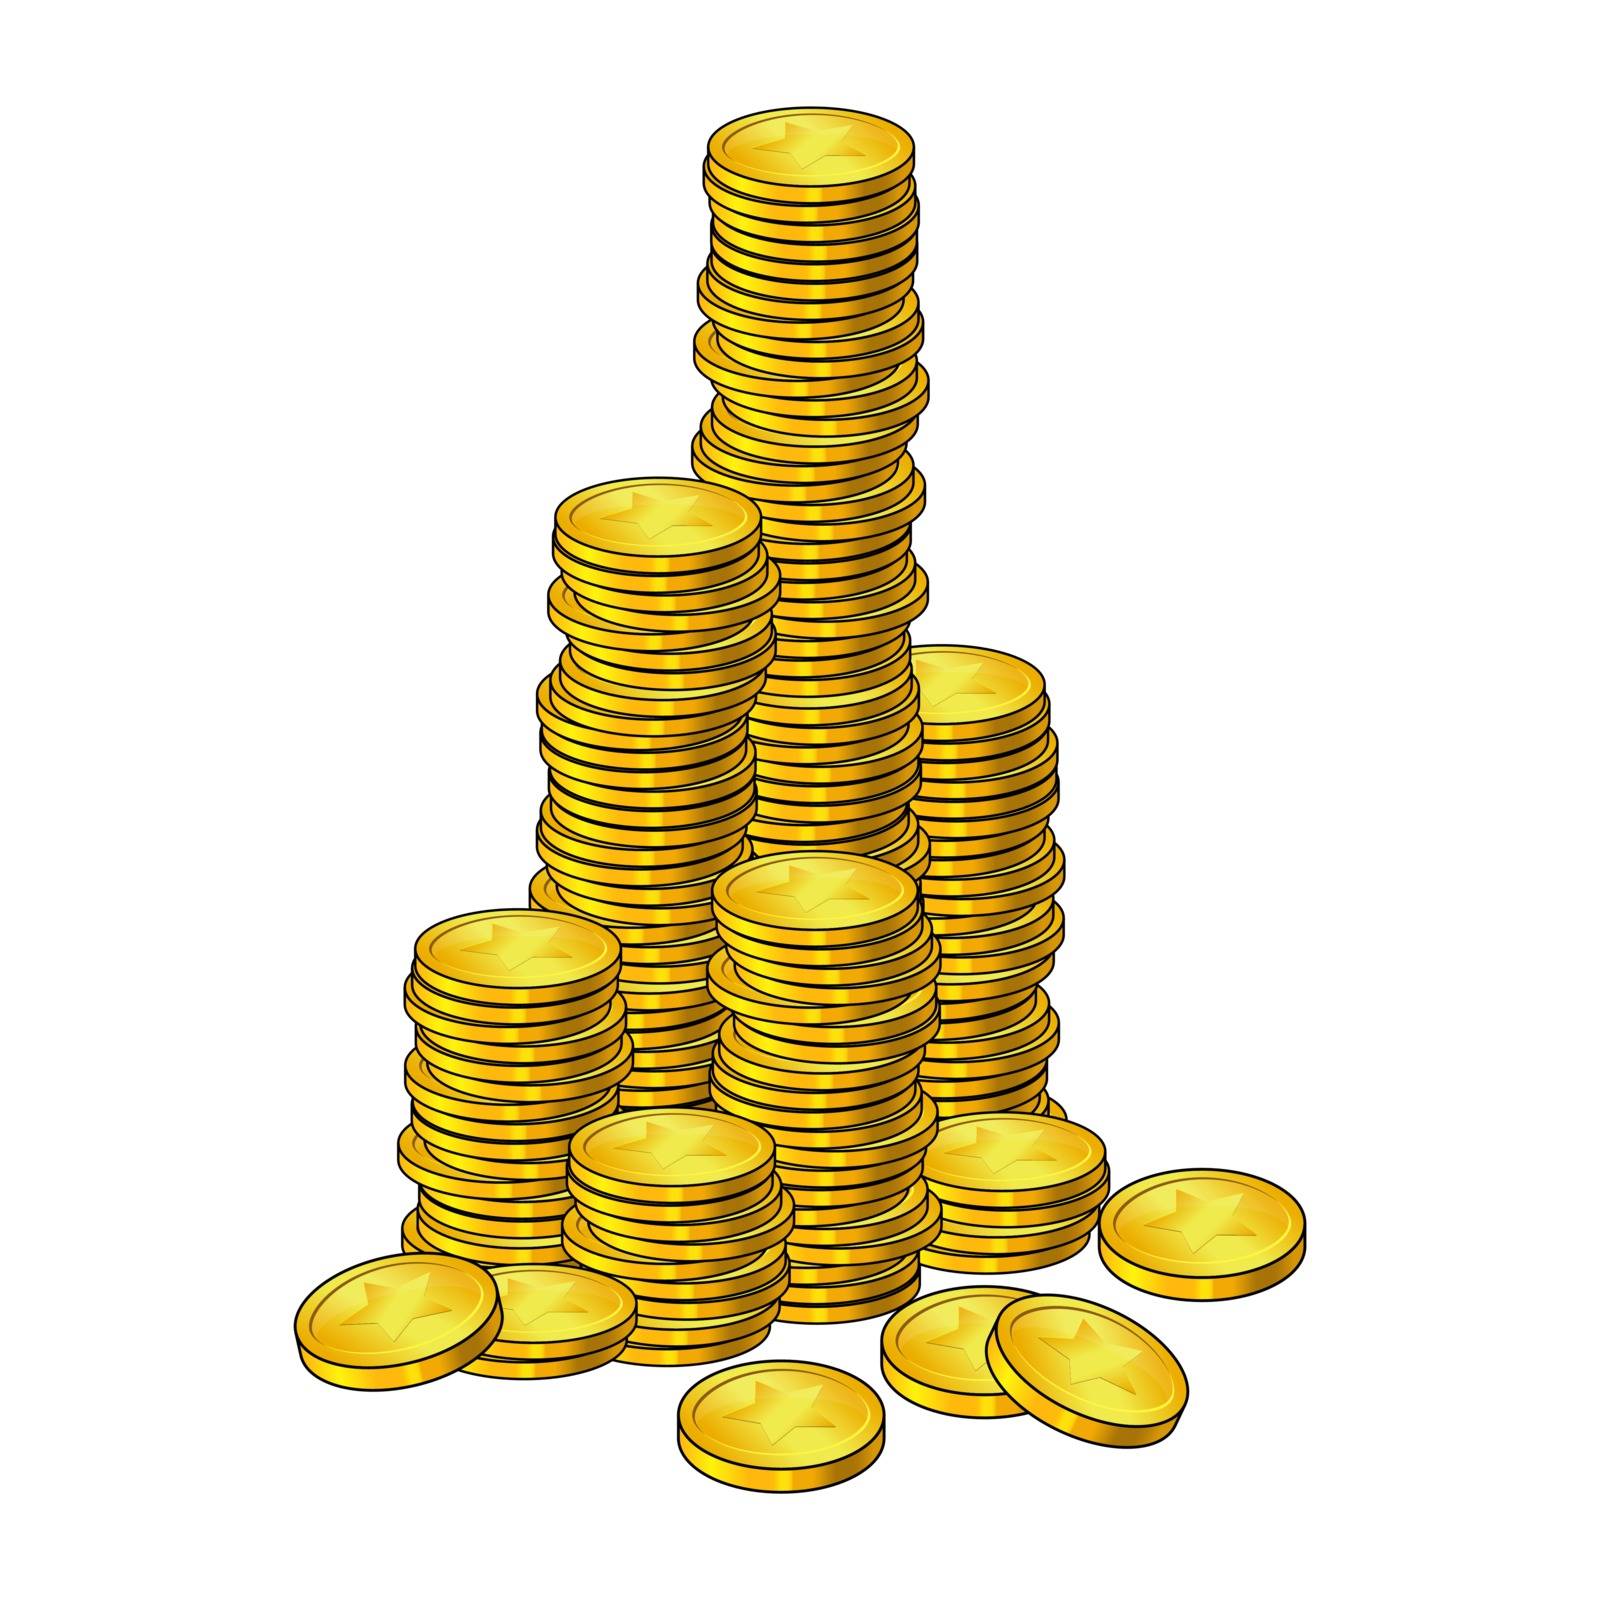 Coins mountain cartoon style.  Isolated icon. On white background. pile,stack of gold money. Big Cash column,tower.